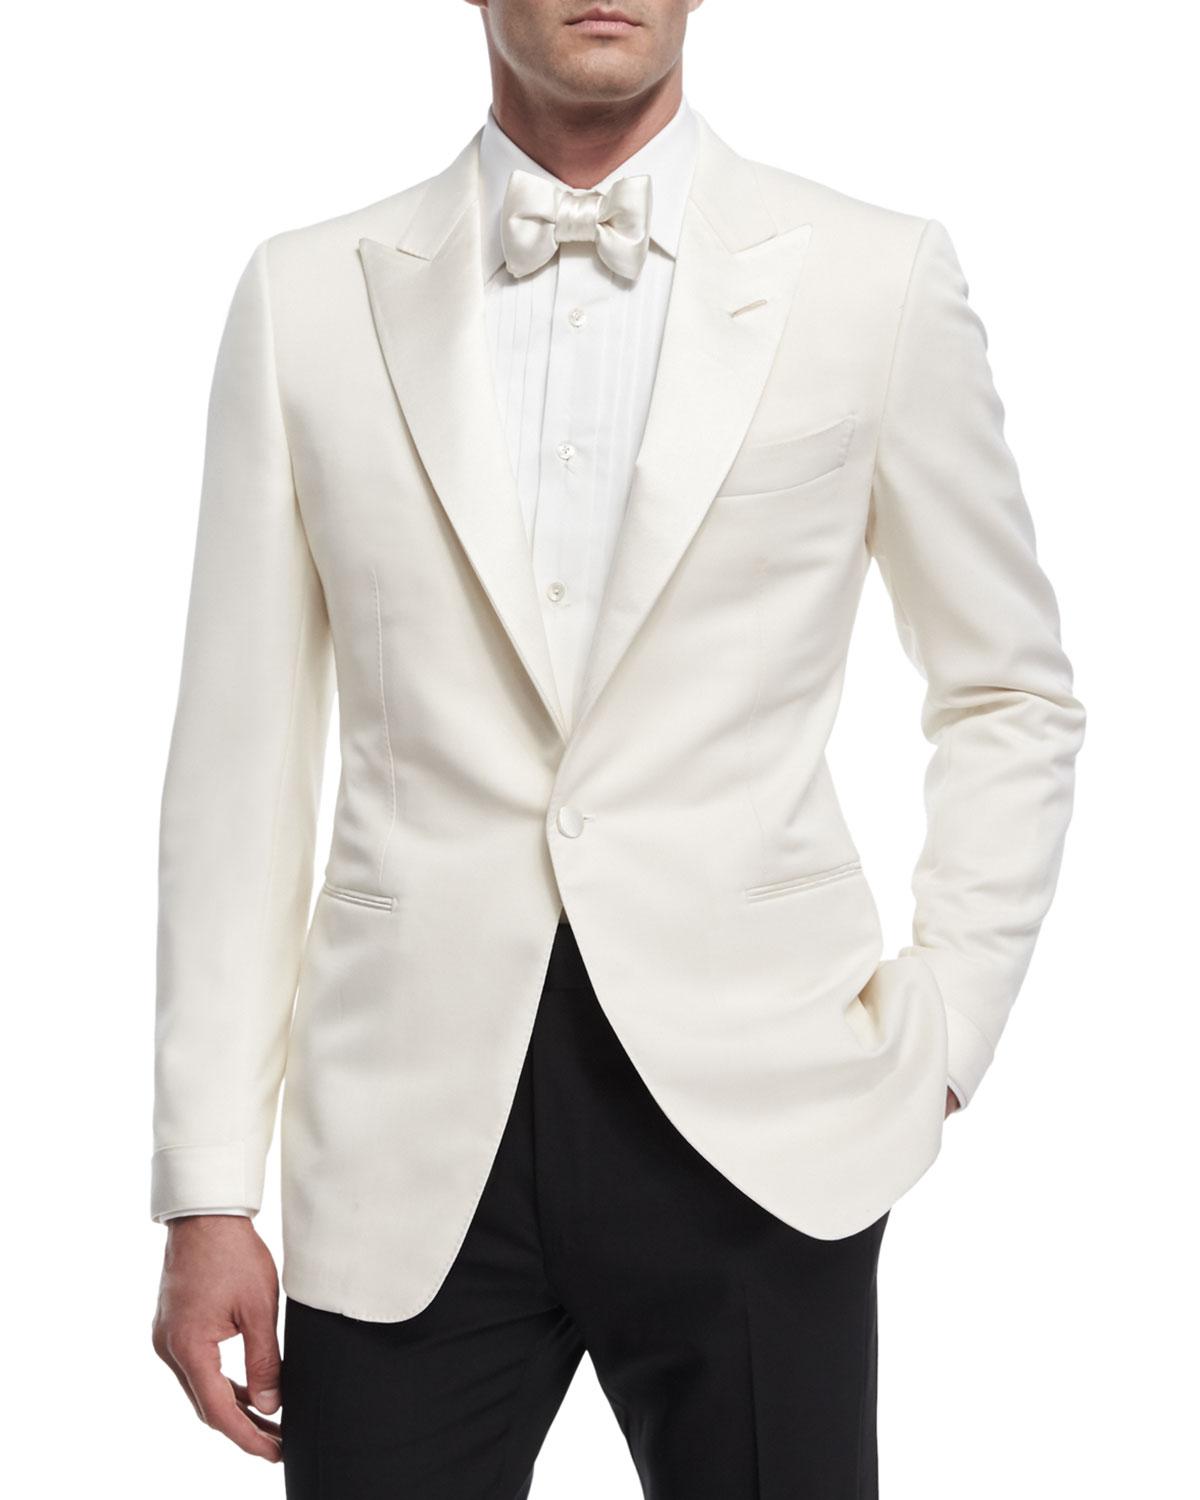 Fisker Muligt Soaked Tom Ford White Jacket Switzerland, SAVE 30% - icarus.photos